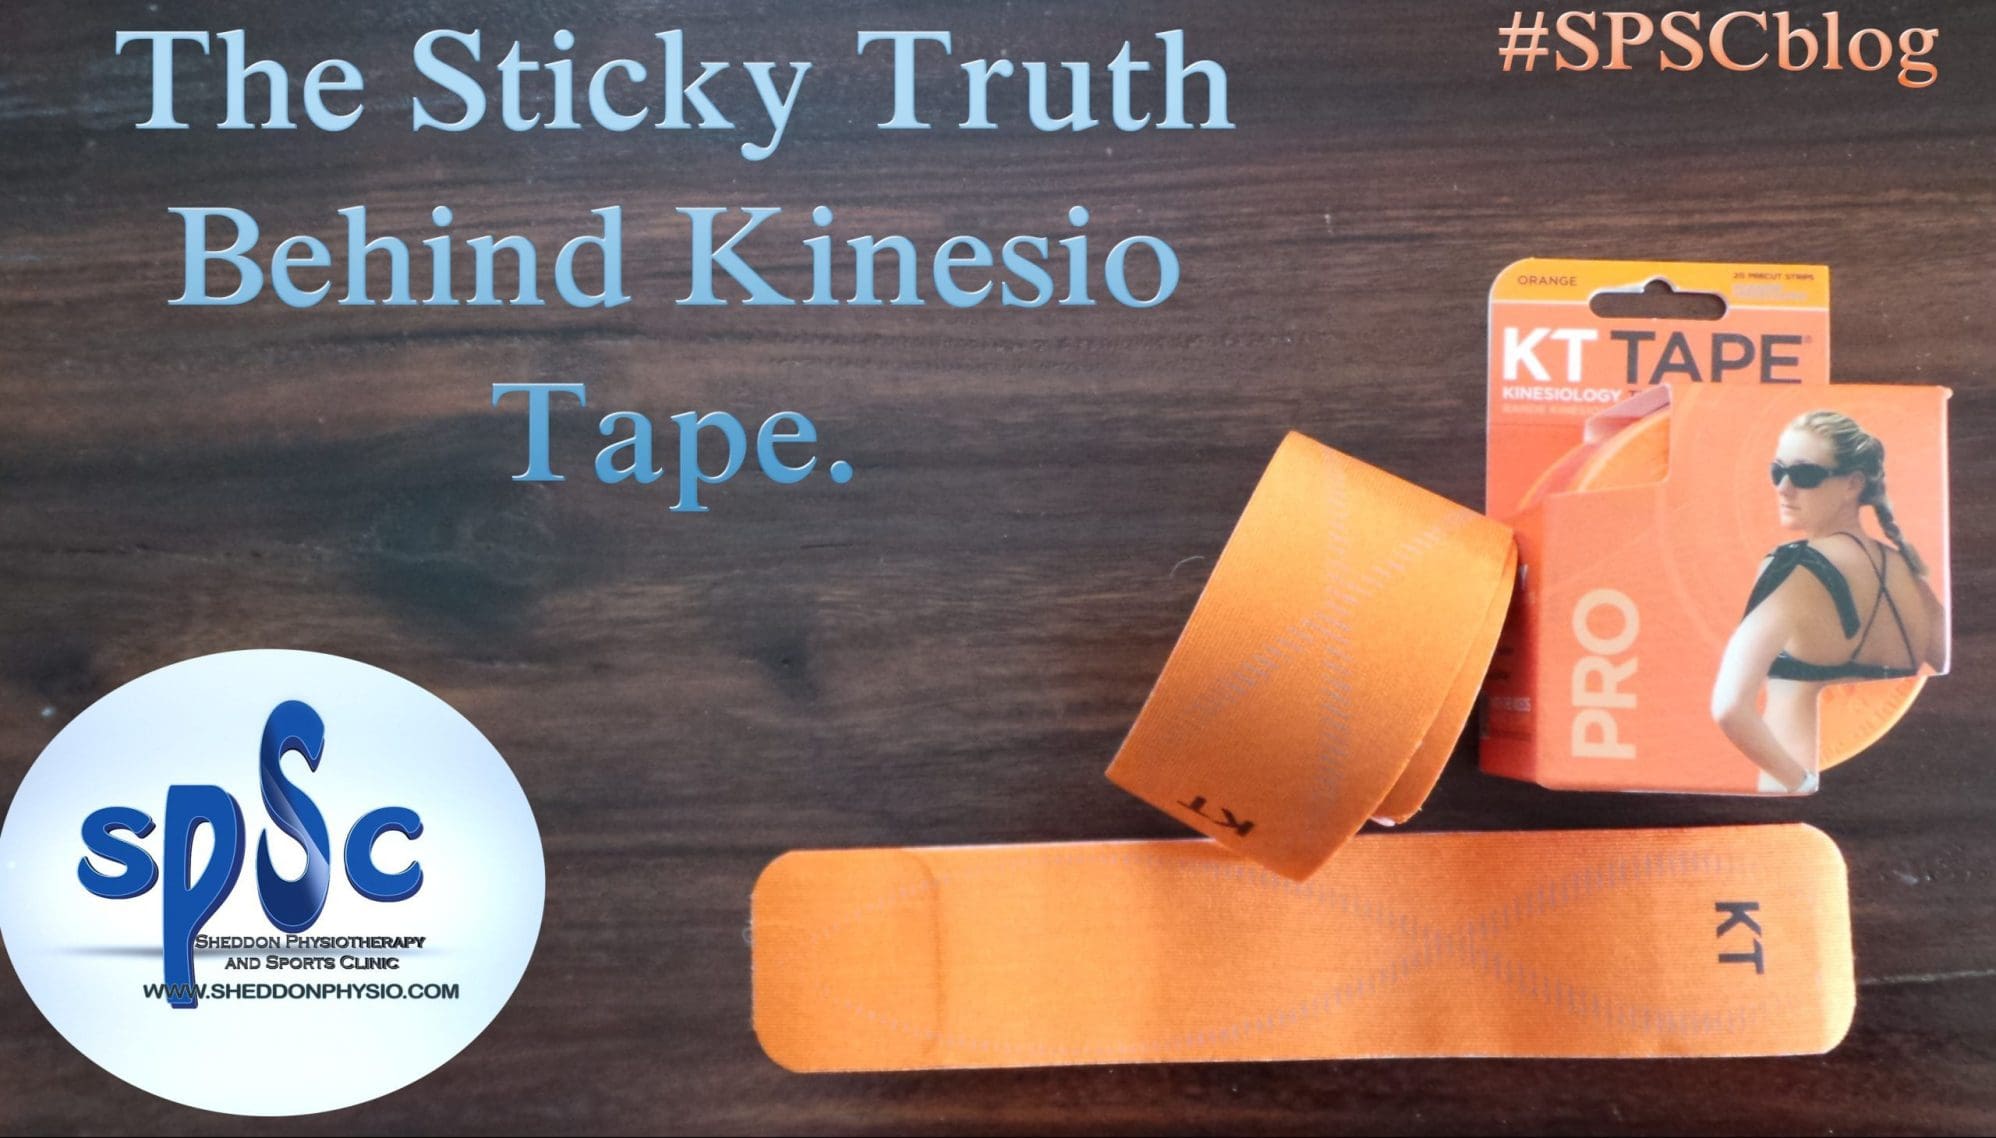 The Sticky Truth Behind Kinesio Tape KT